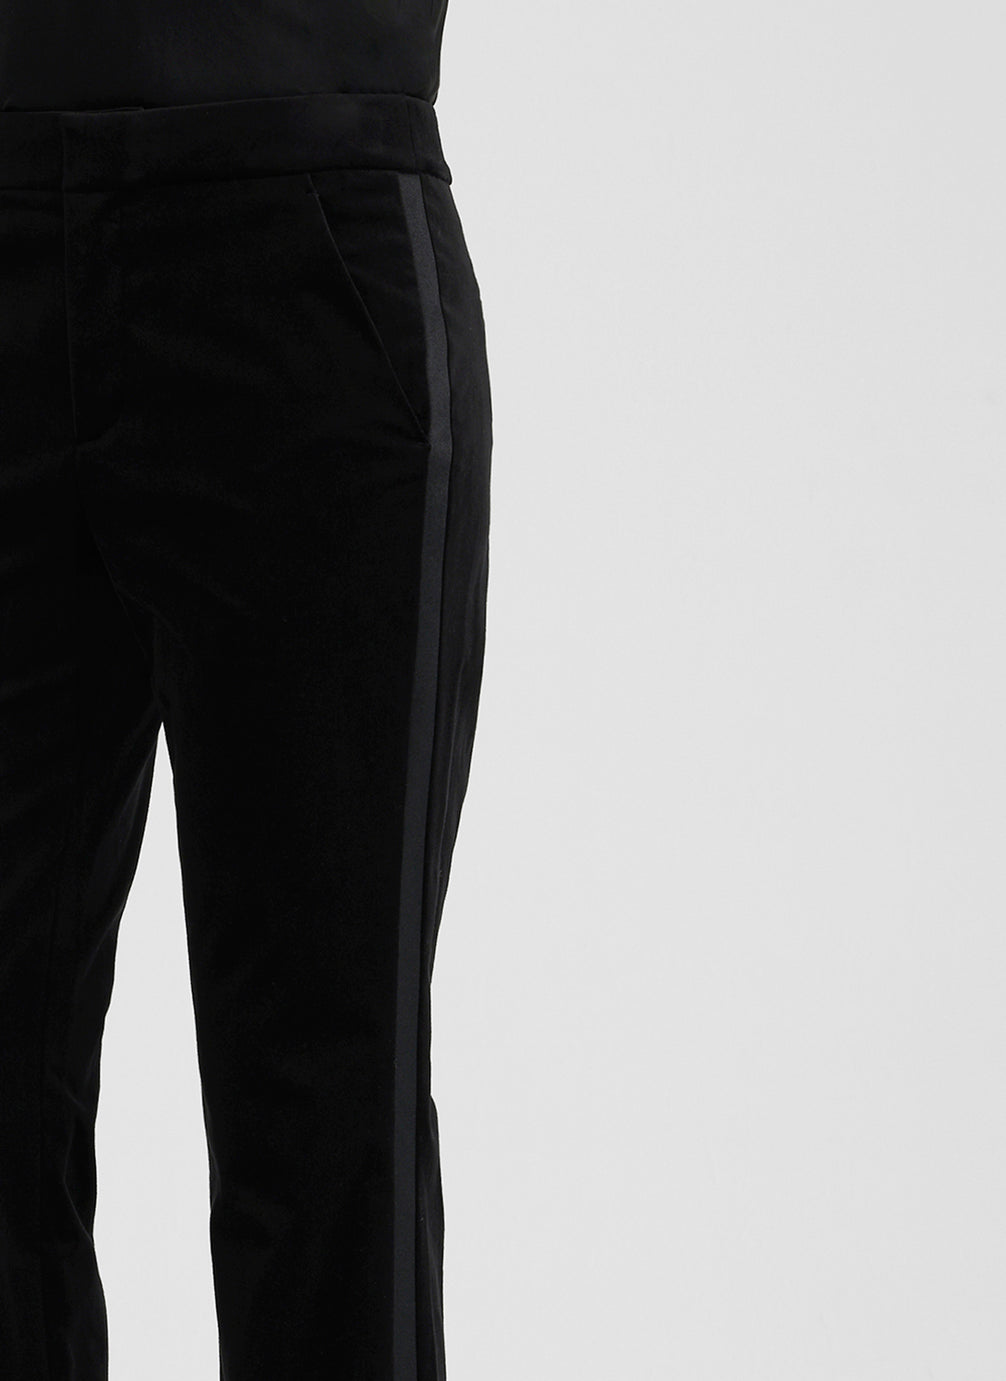 detail view of woman wearing black satin camisole and black velvet pants